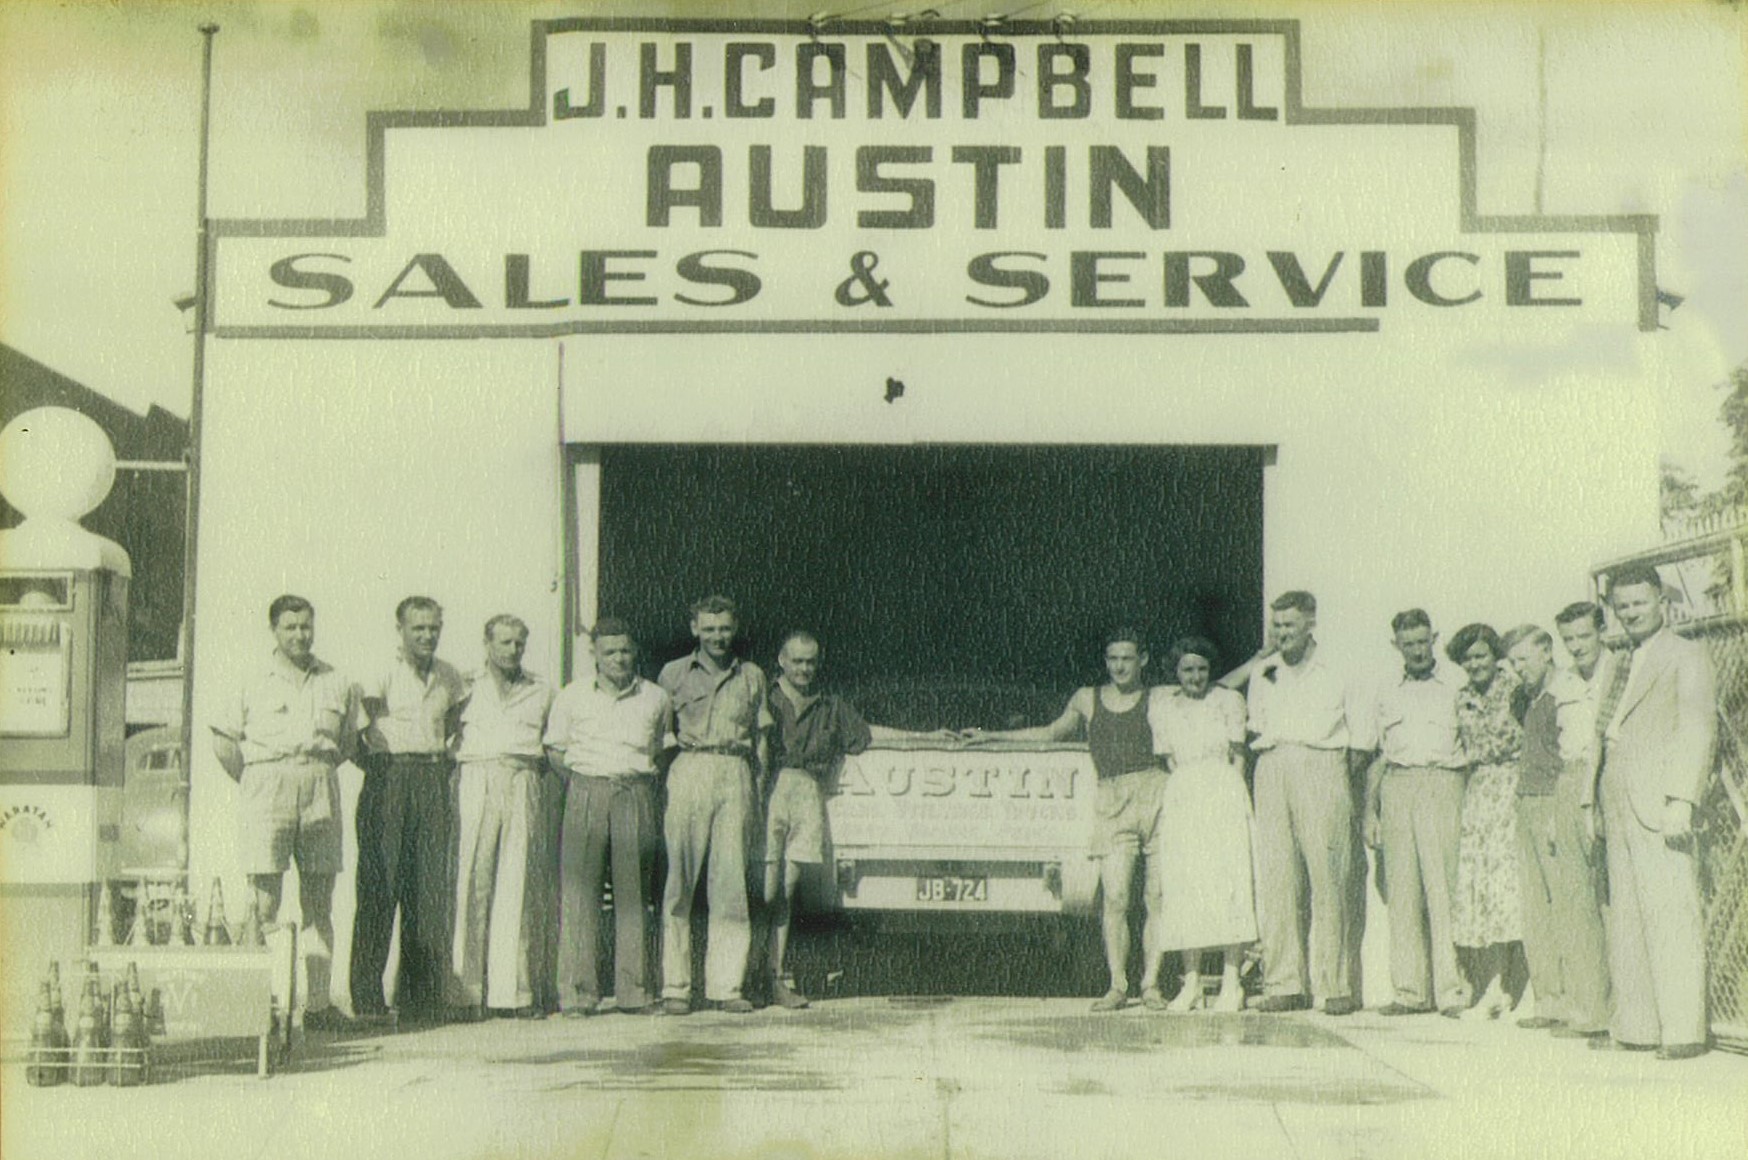 J A Campbell, Austin Agency: Photo taken about 1950 before Boyce started with the business in 1952 as an apprentice panel beater/spray painter. Bill Peno (sales manager), Jim Rook (motor mechanic), Stan Shepherdson (transport driver), Edward Armstrong (spare parts manager), Arthur Coleman (workshop foreman), Innes Adams (spray painter), Arch Hay (apprentice mechanic), Judith Foster (office assistant), Percy Armstrong (labourer), Keith Petrie (salesman - earthmoving), Fay Delaney (secretary to JH Campbell), Ron Campbell (apprentice mechanic), Fred Peno (motor mechanic) and JH Campbell (proprietor). This is now the site of Cafe One23 and backed on to Tibbereena Street.